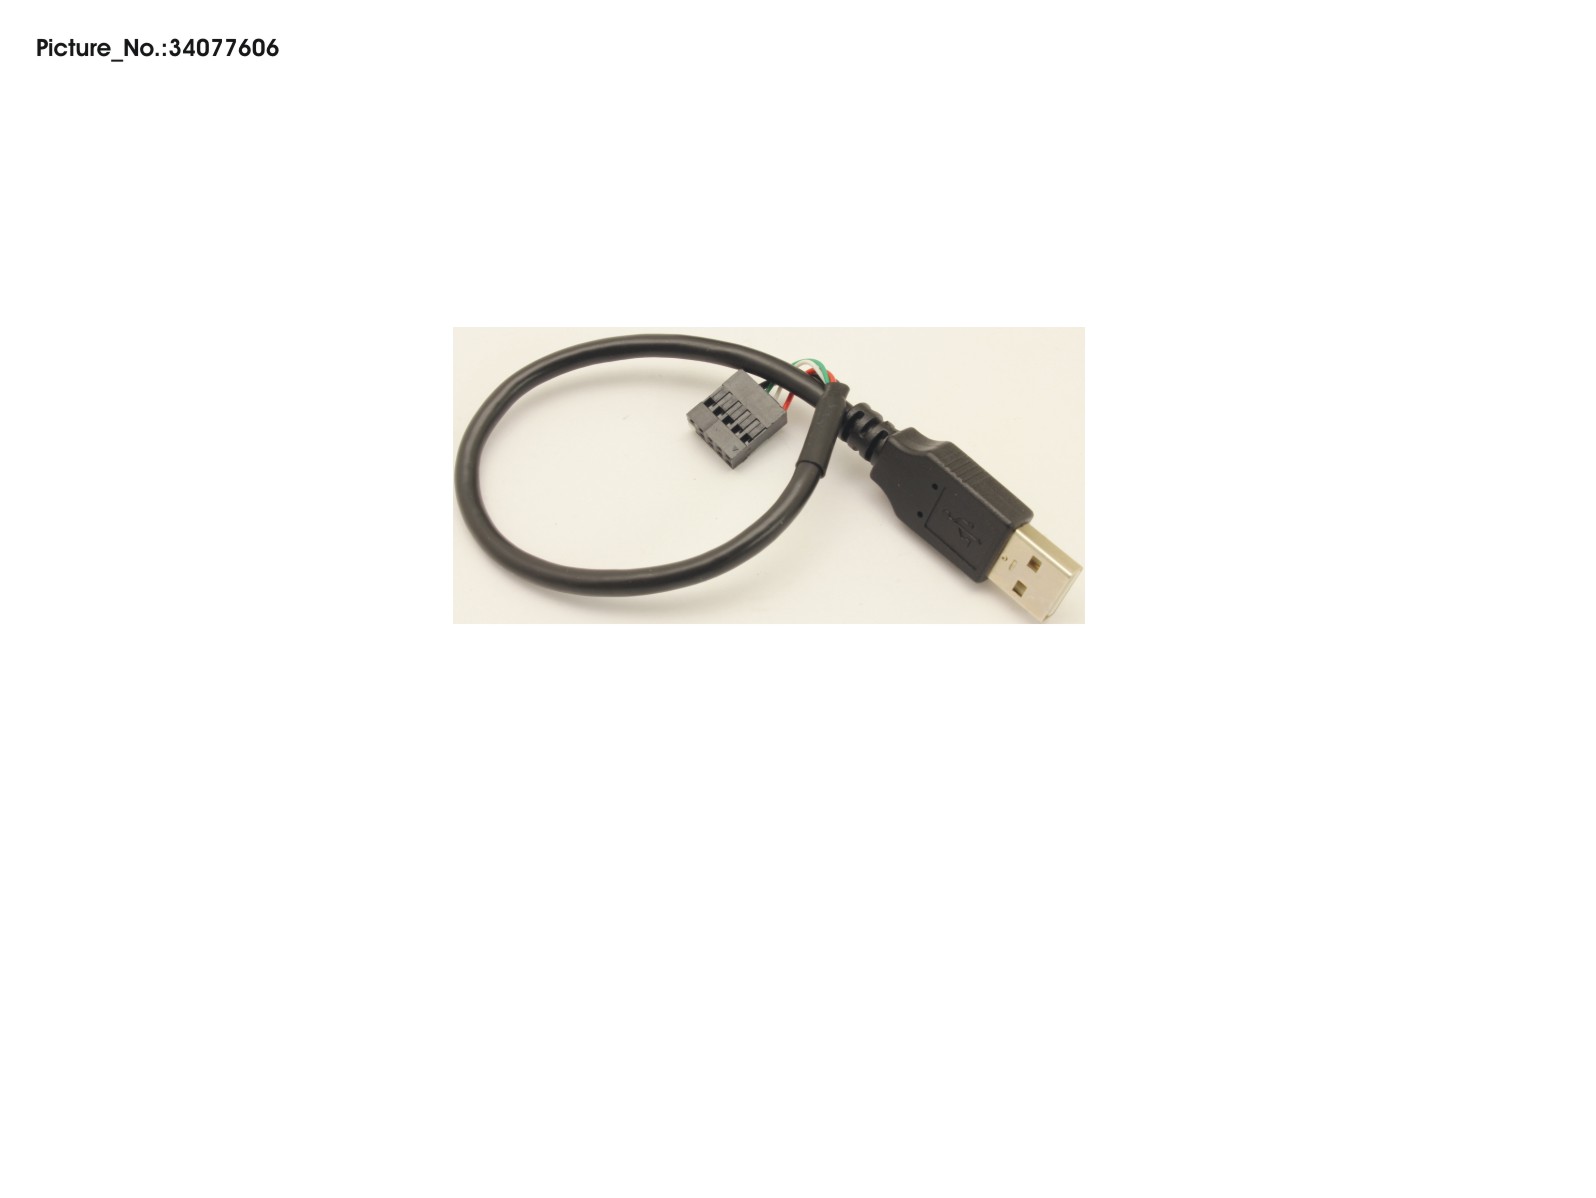 CABLE USB-BT 280